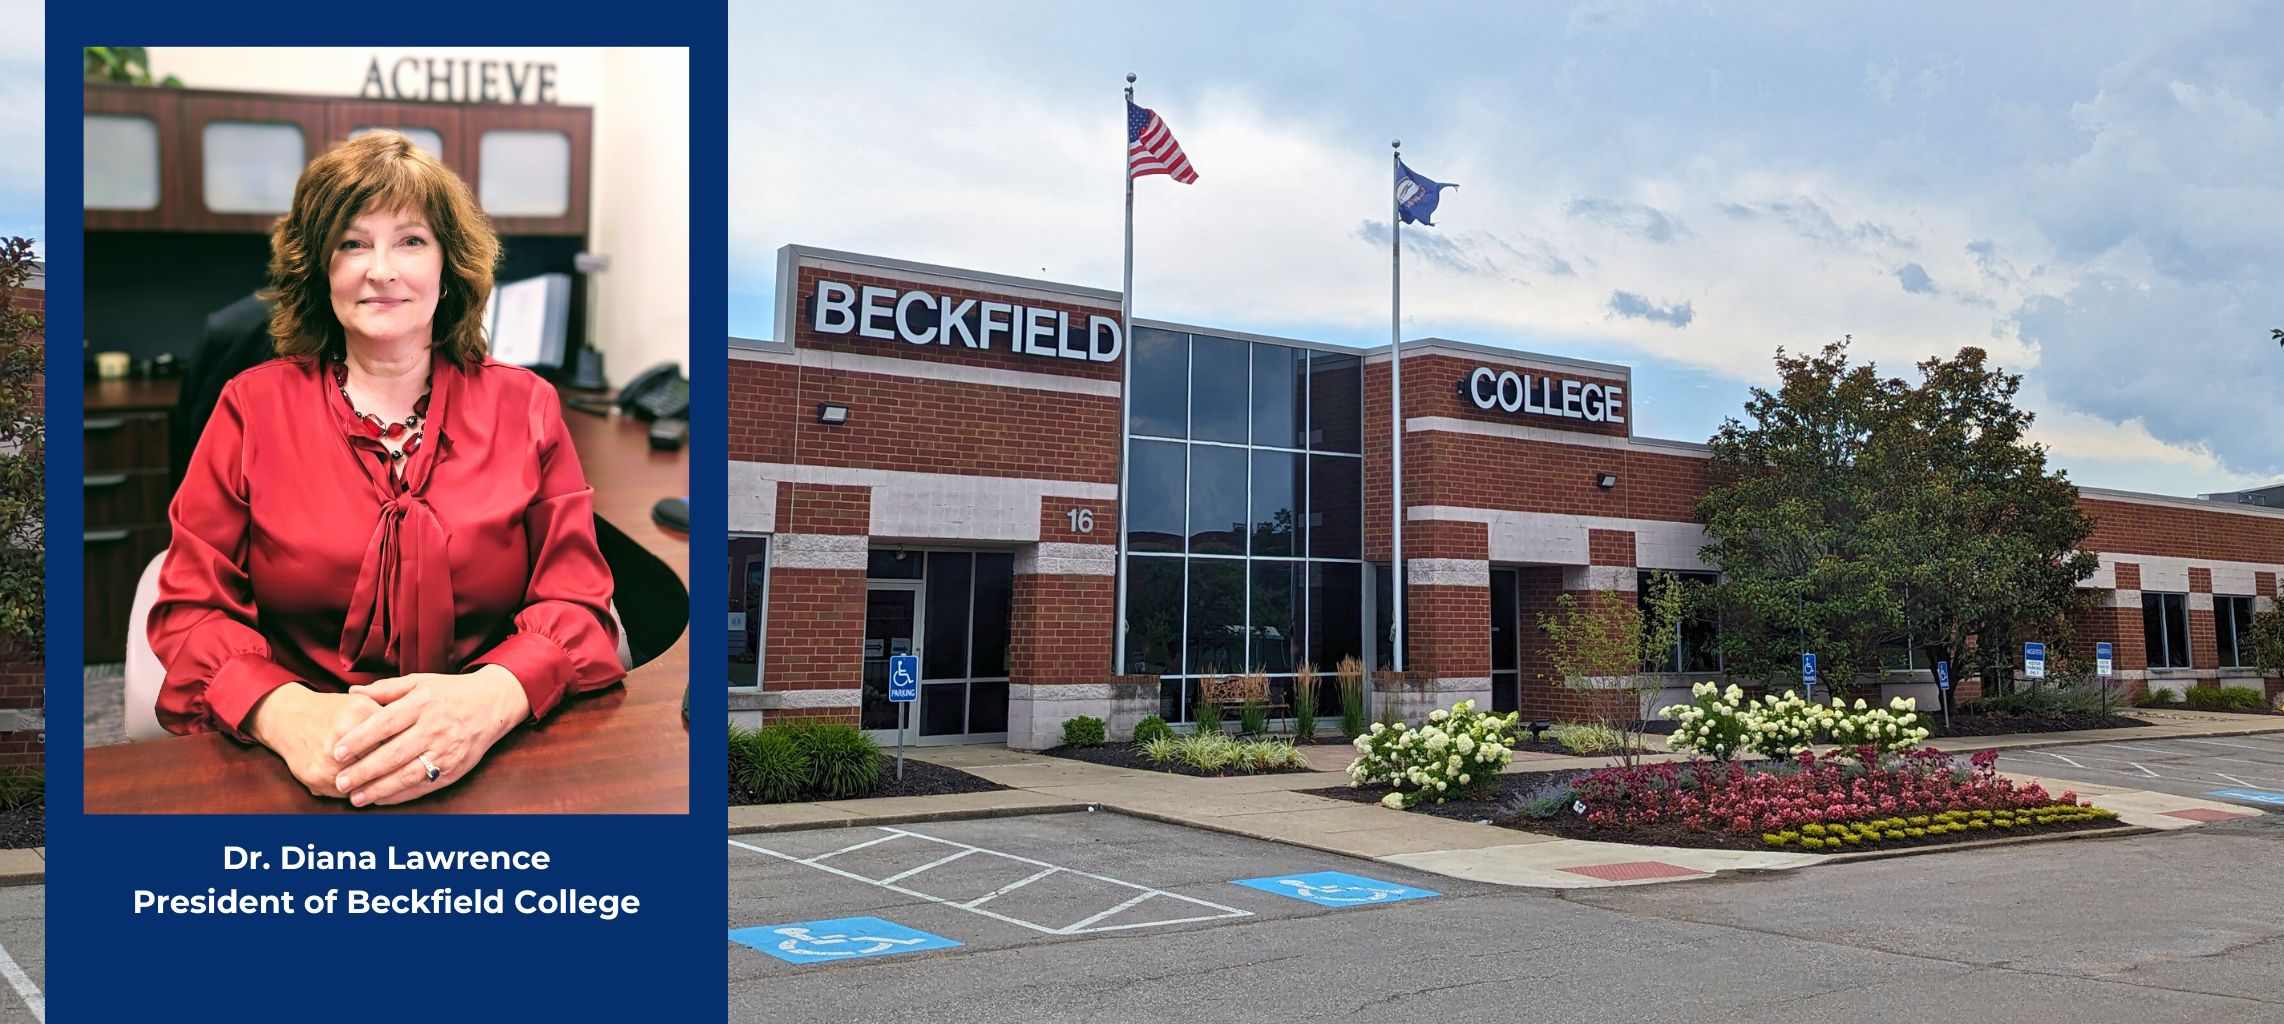 Beckfield College Celebrates 40 Years with 93% NCLEX Passing Rate; Welcomes New President